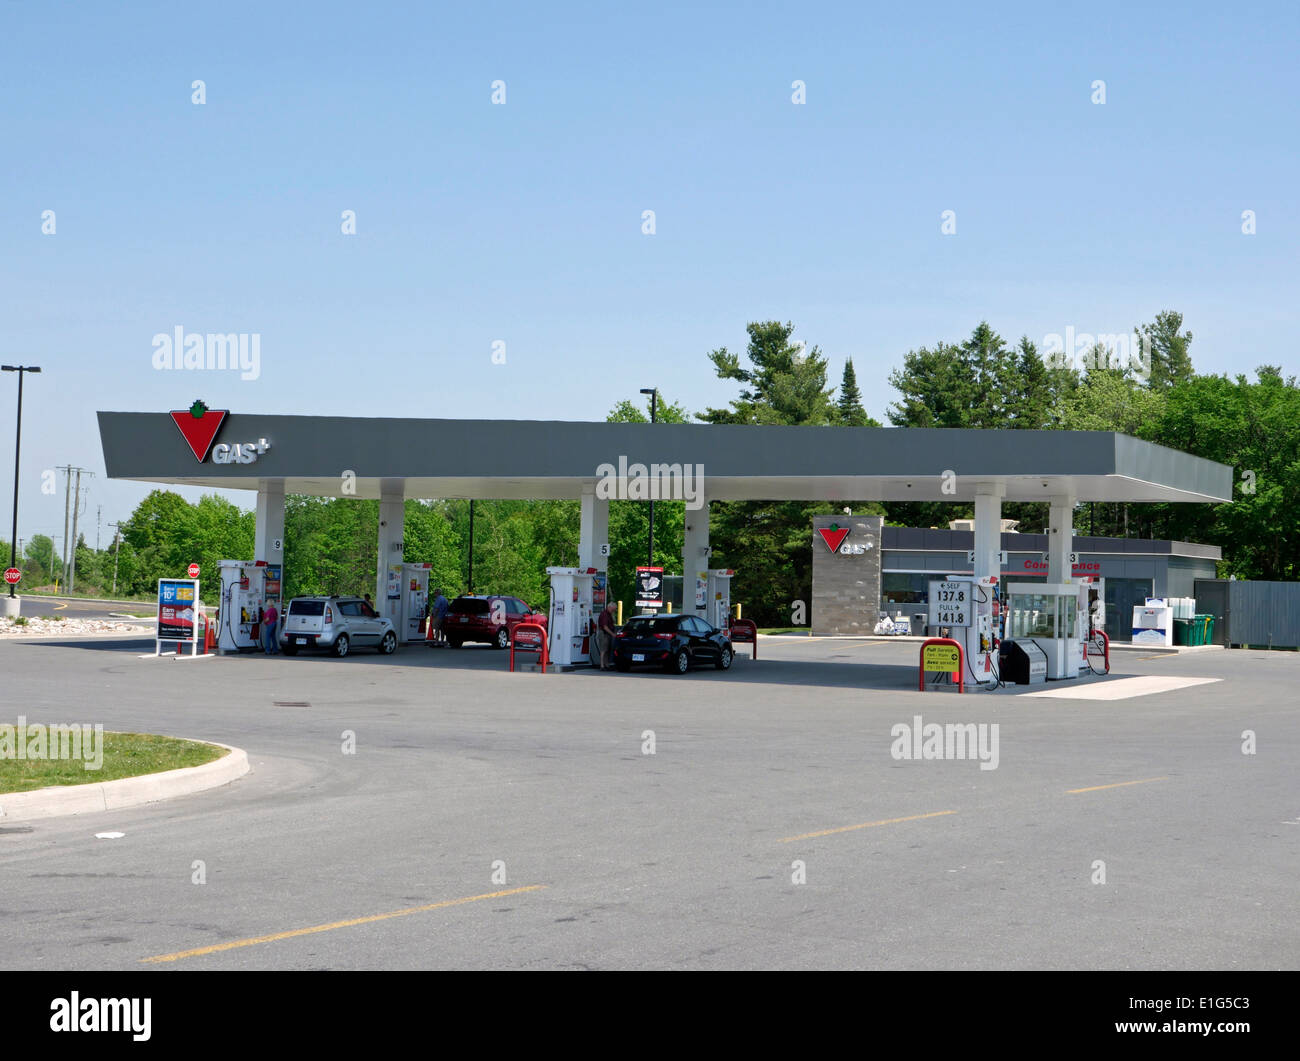 ONroute The New Ontario Highway Service Centres Along The 401 Series Motorways In Canada Stock Photo